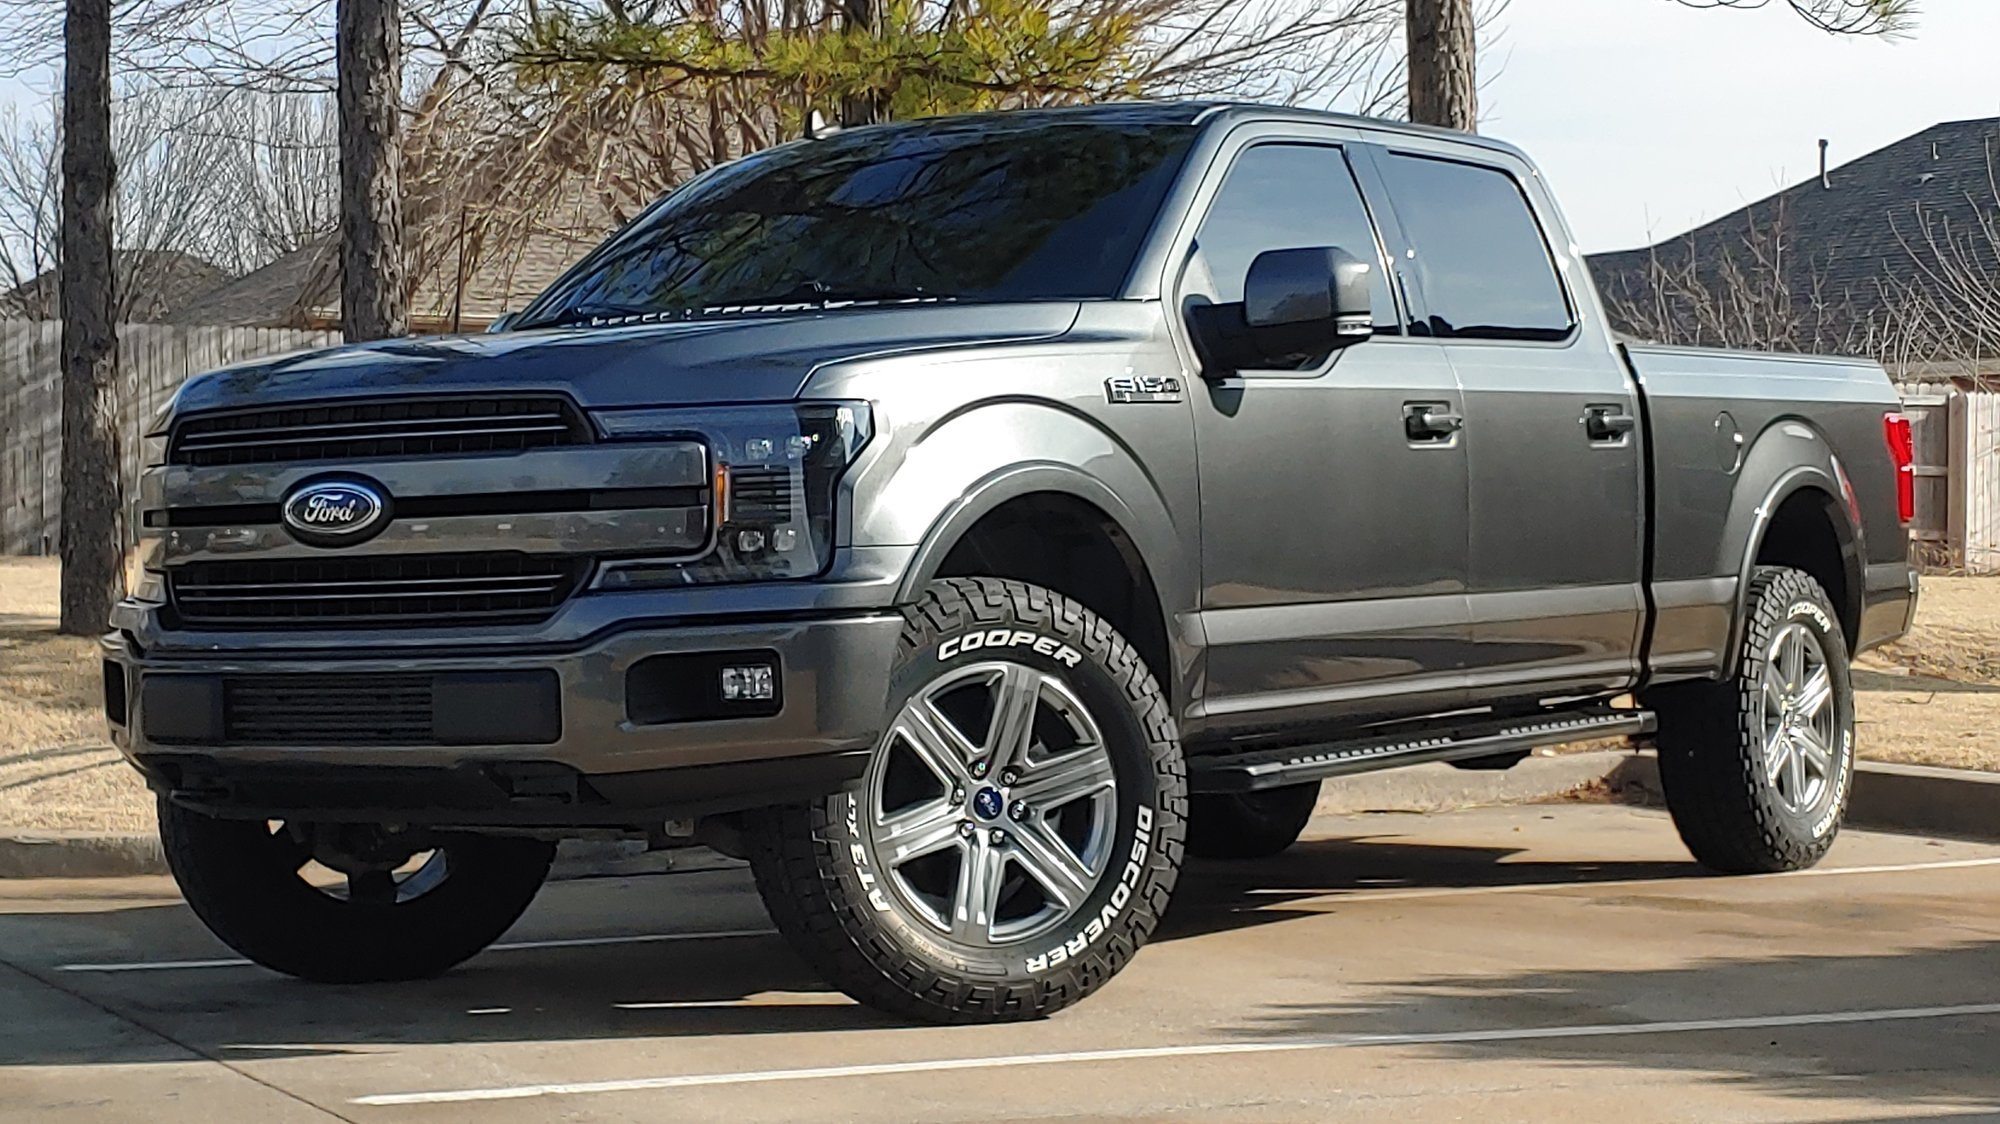 cooper-at3-4s-or-falken-at3w-page-2-ford-f150-forum-community-of